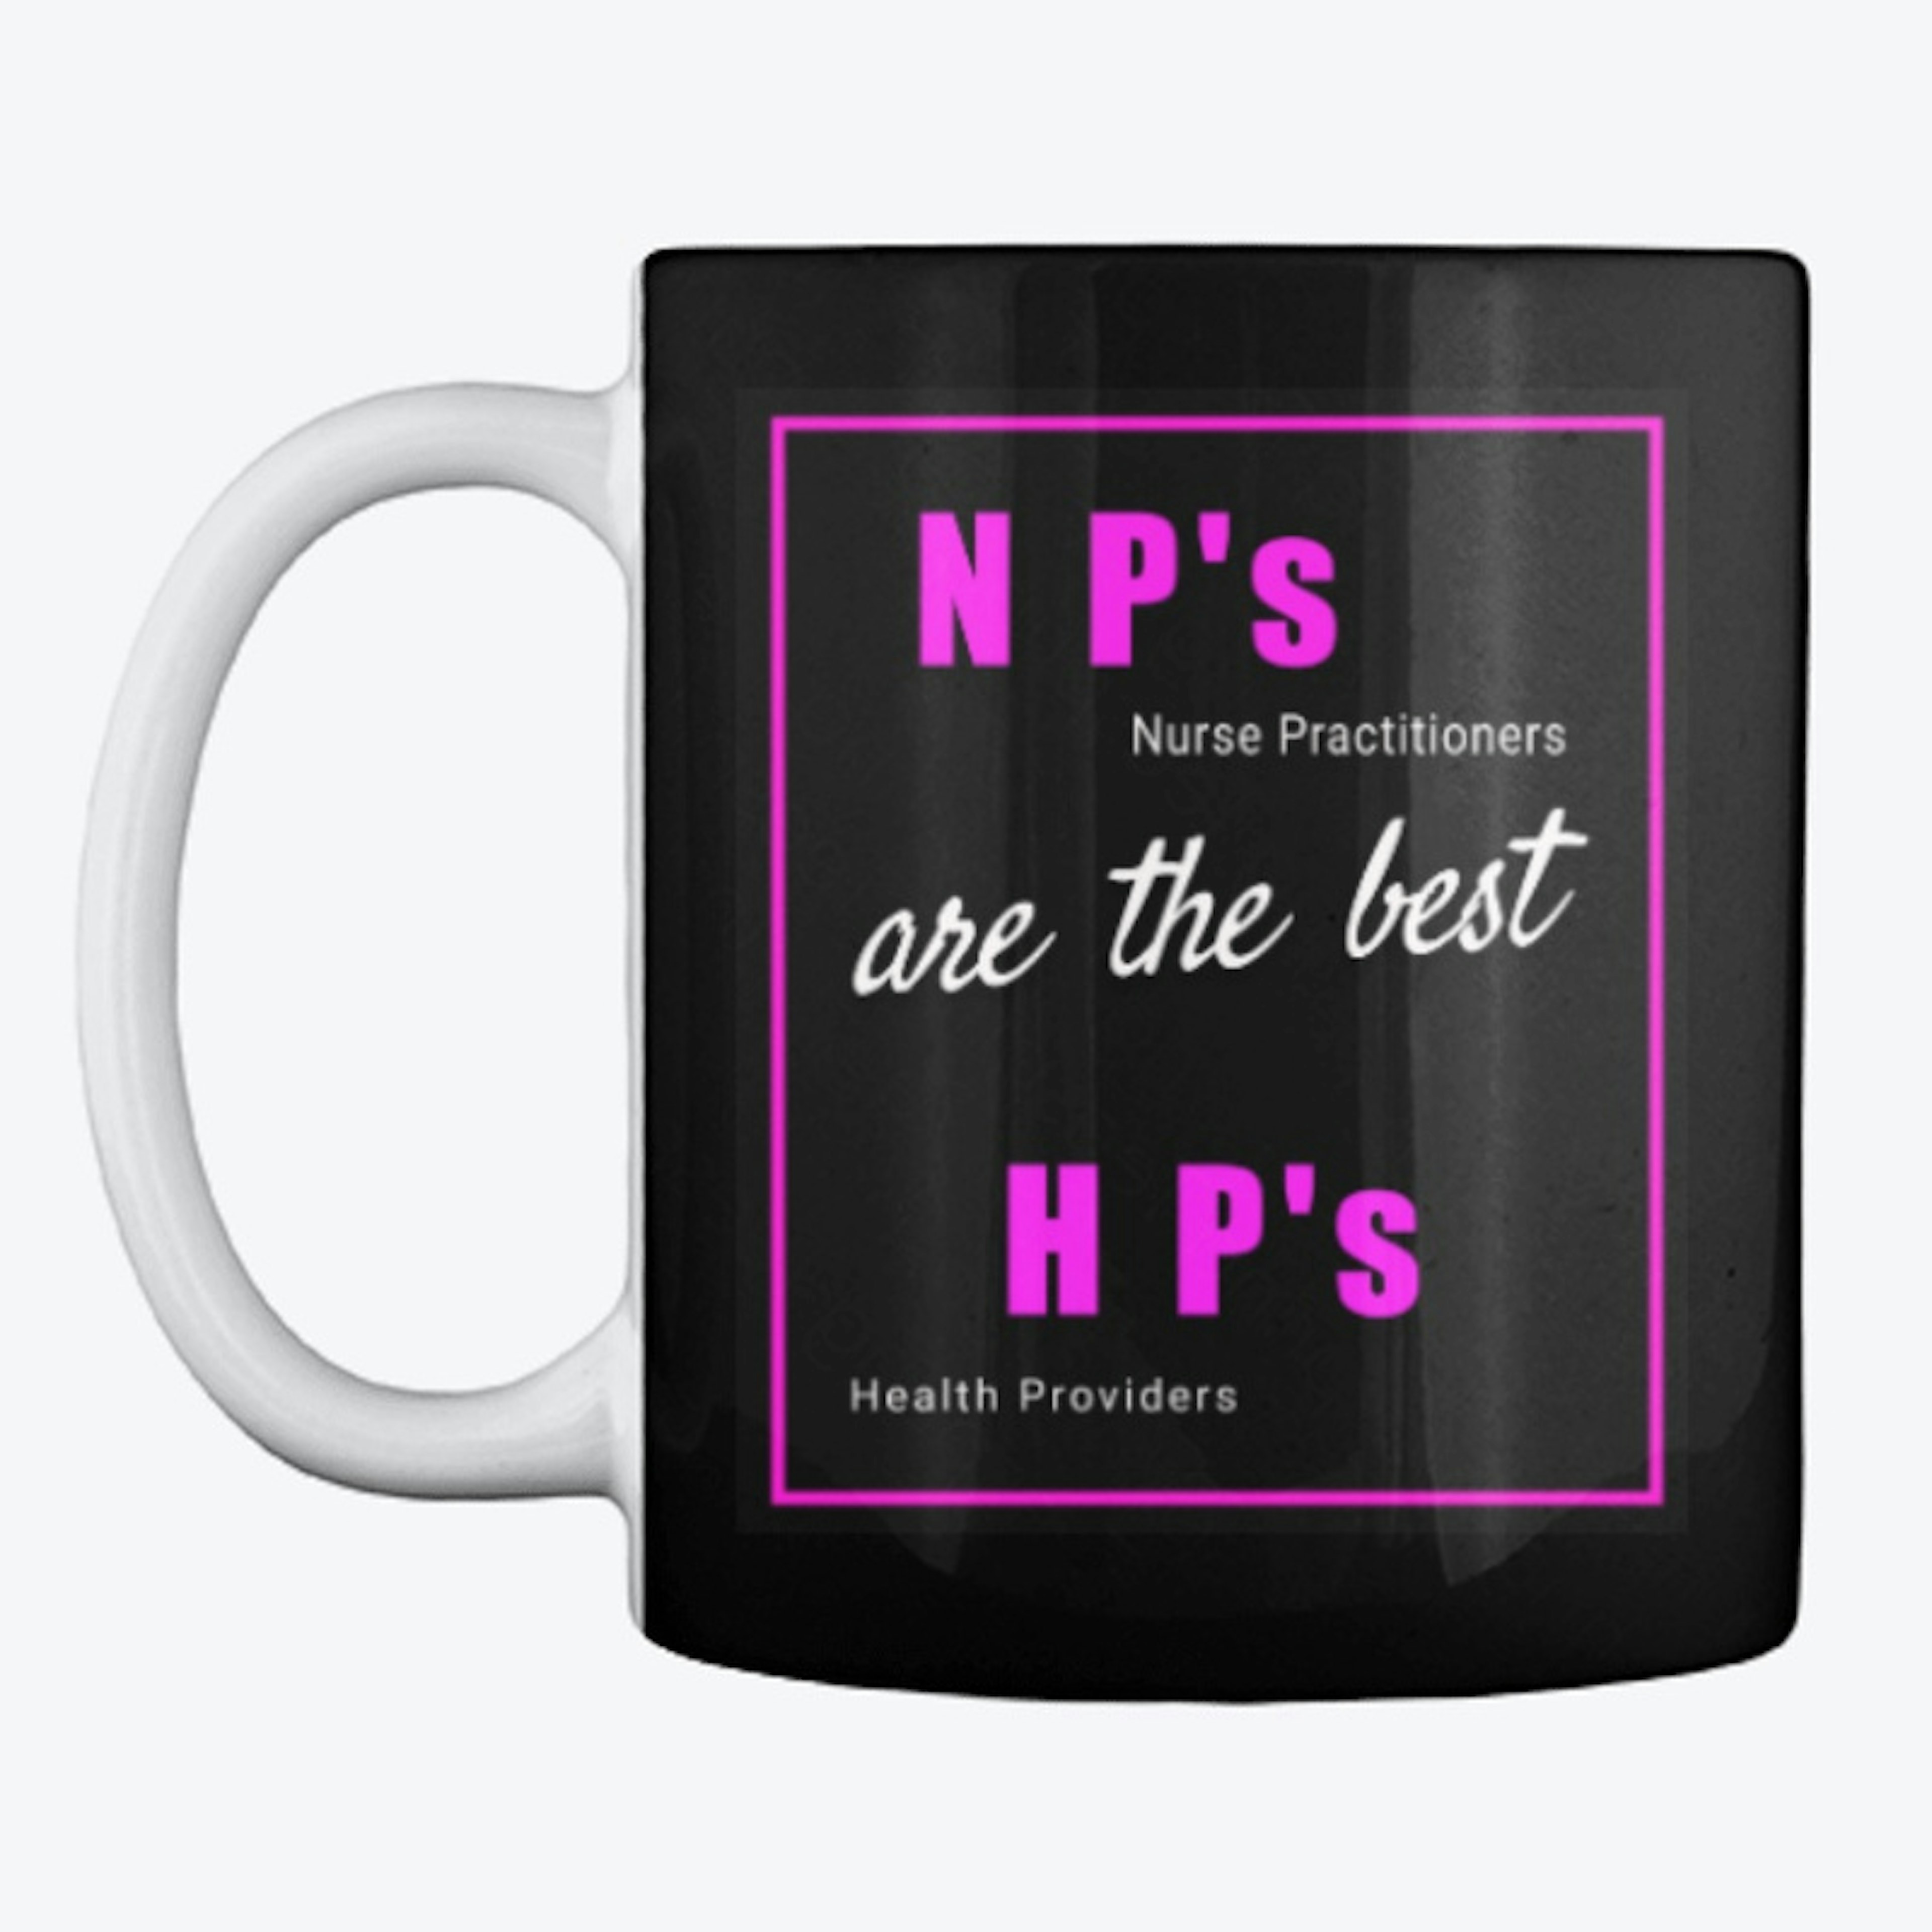 Np's are the best HP's